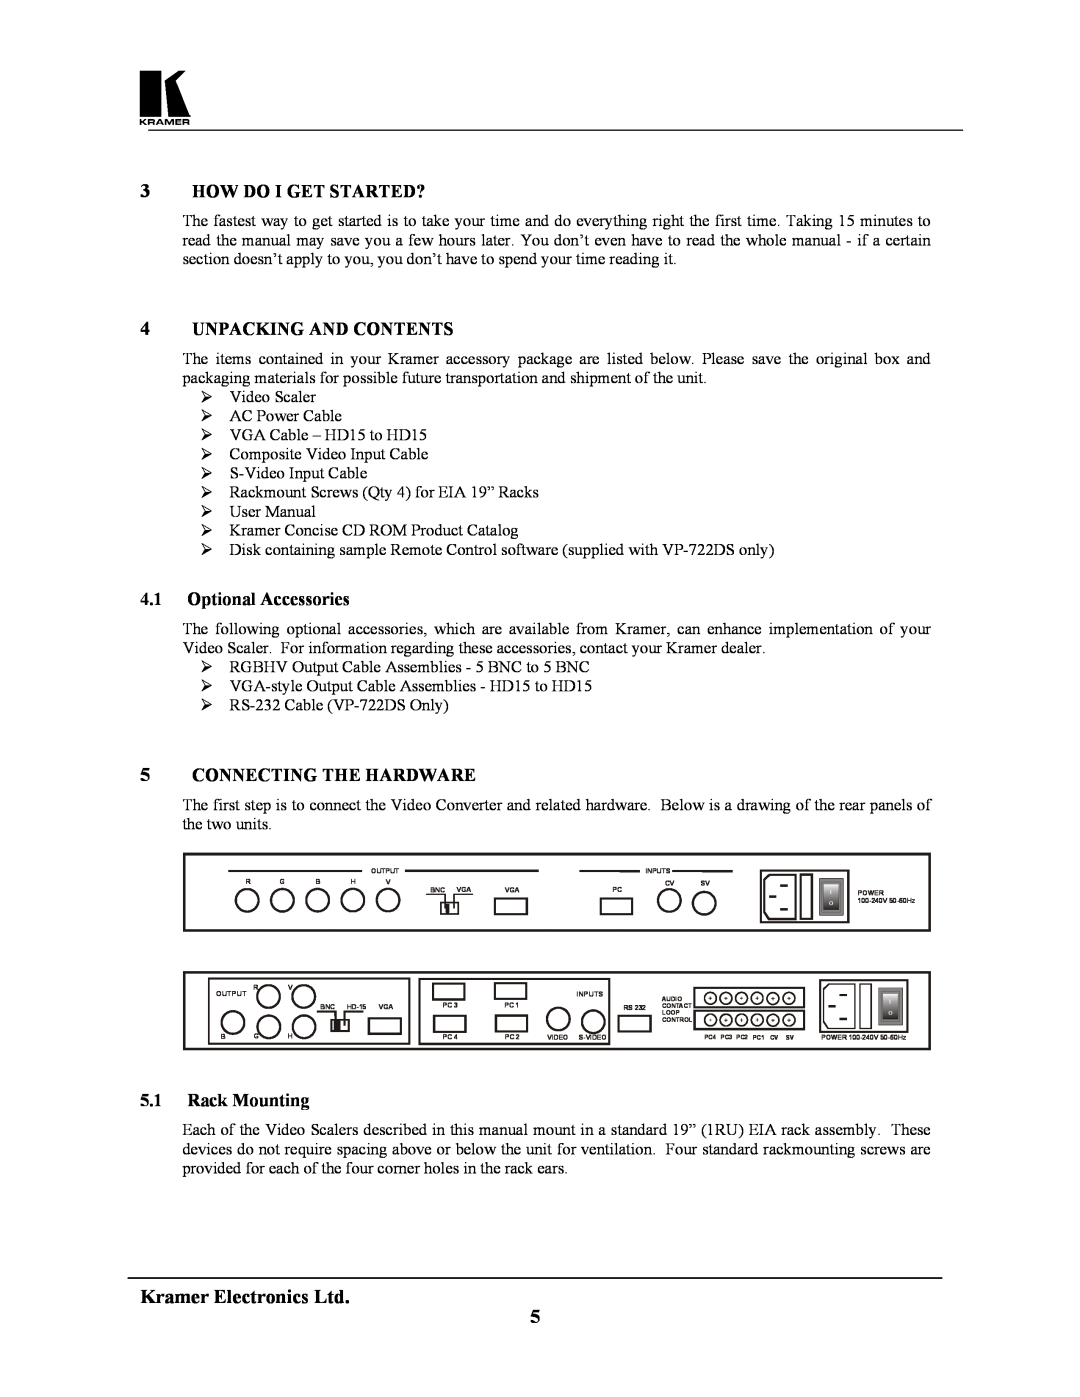 Kramer Electronics VP-721DS How Do I Get Started?, Unpacking And Contents, Optional Accessories, Connecting The Hardware 